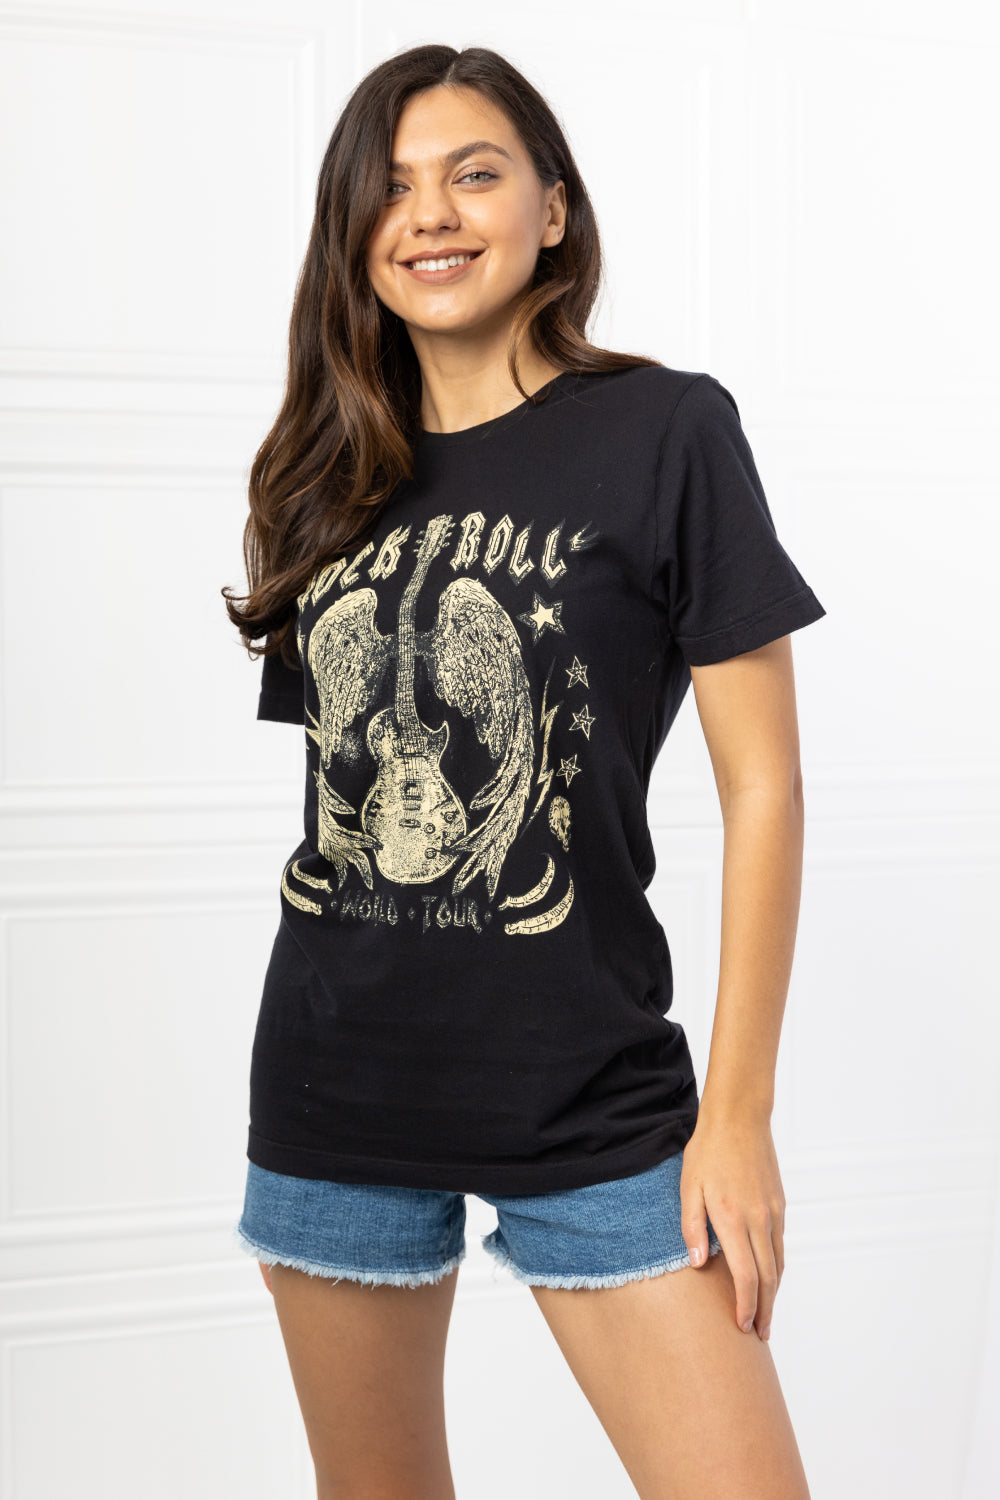 Women's mineB Full Size Rock & Roll Graphic Tee